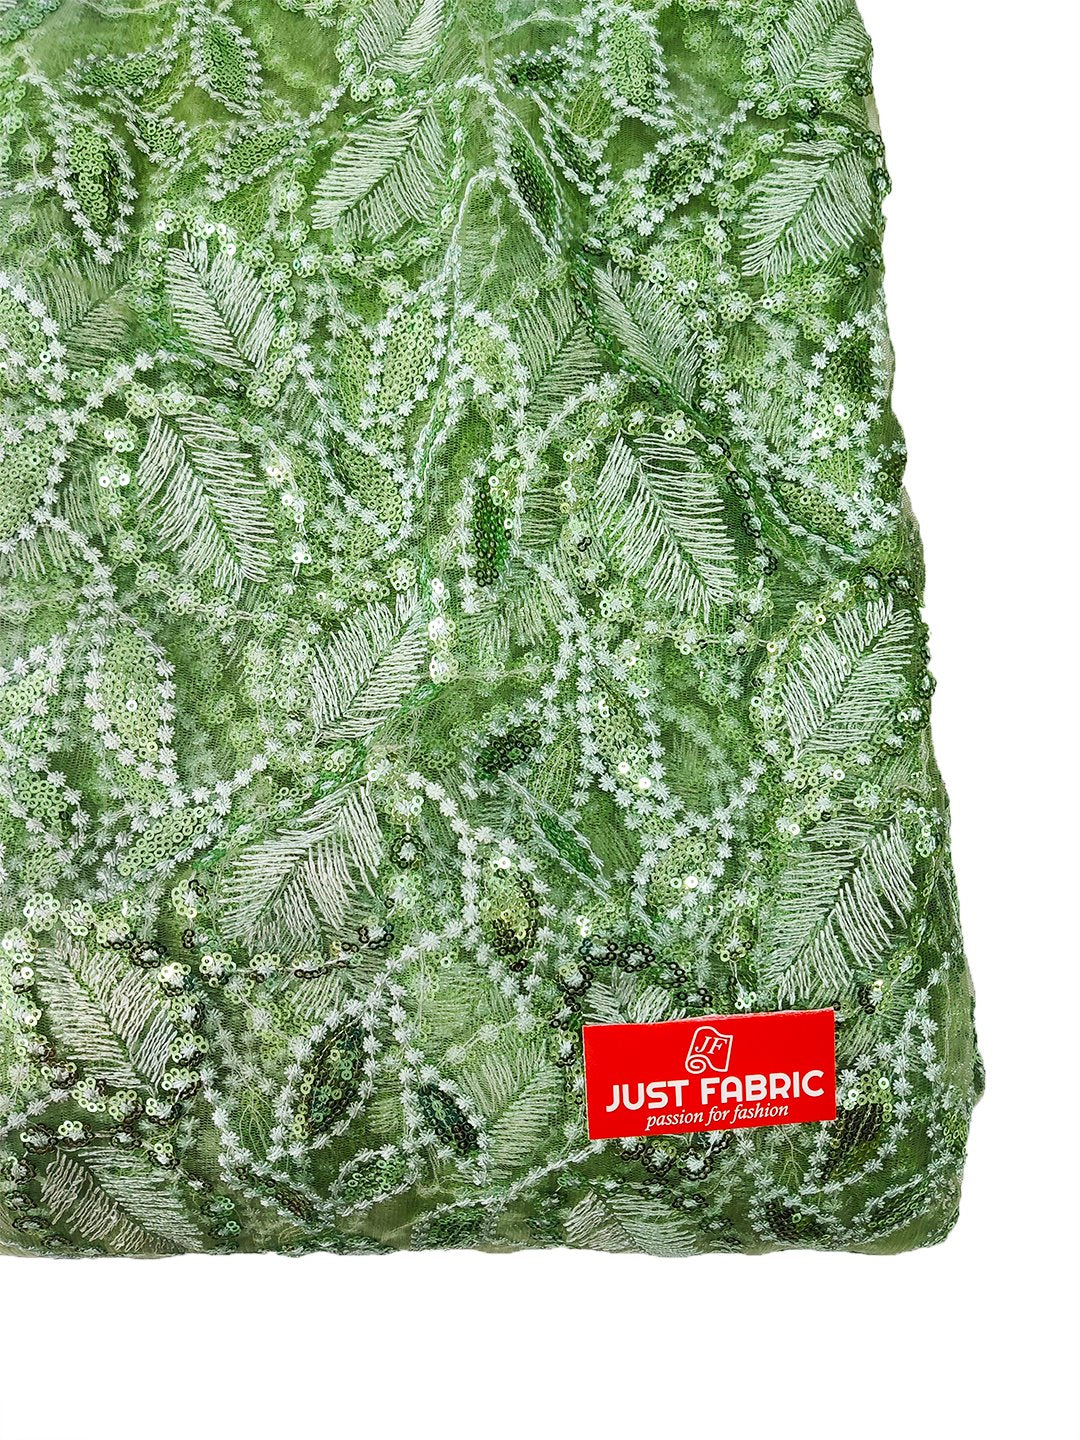 Pista colour Thread Work and Floral Jaal Allover on Net Fabric With Sequin Work Embroidery (60" Inch Width) JUST FABRIC